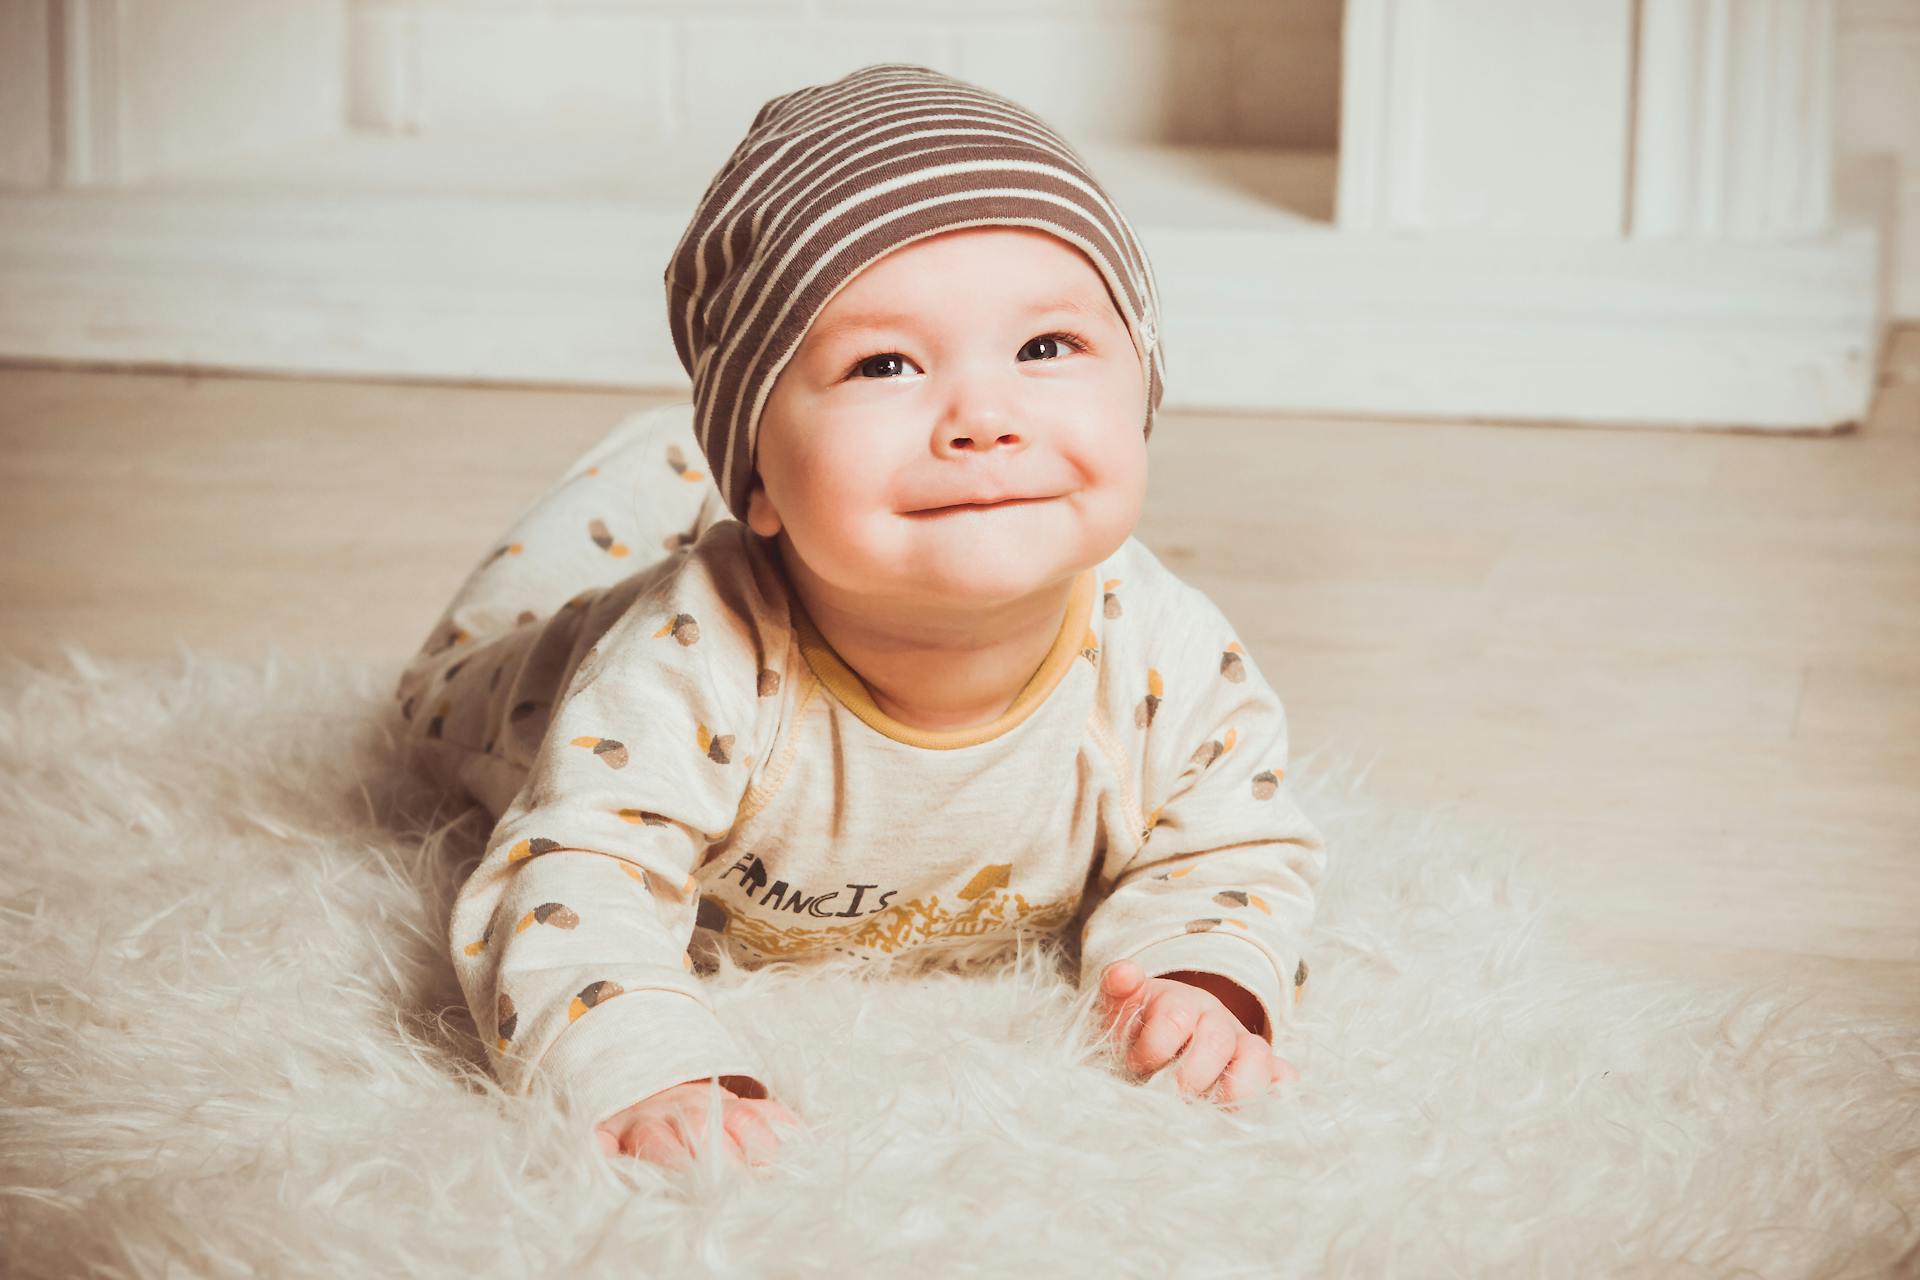 A baby crawling on a fur rug | Source: Pexels